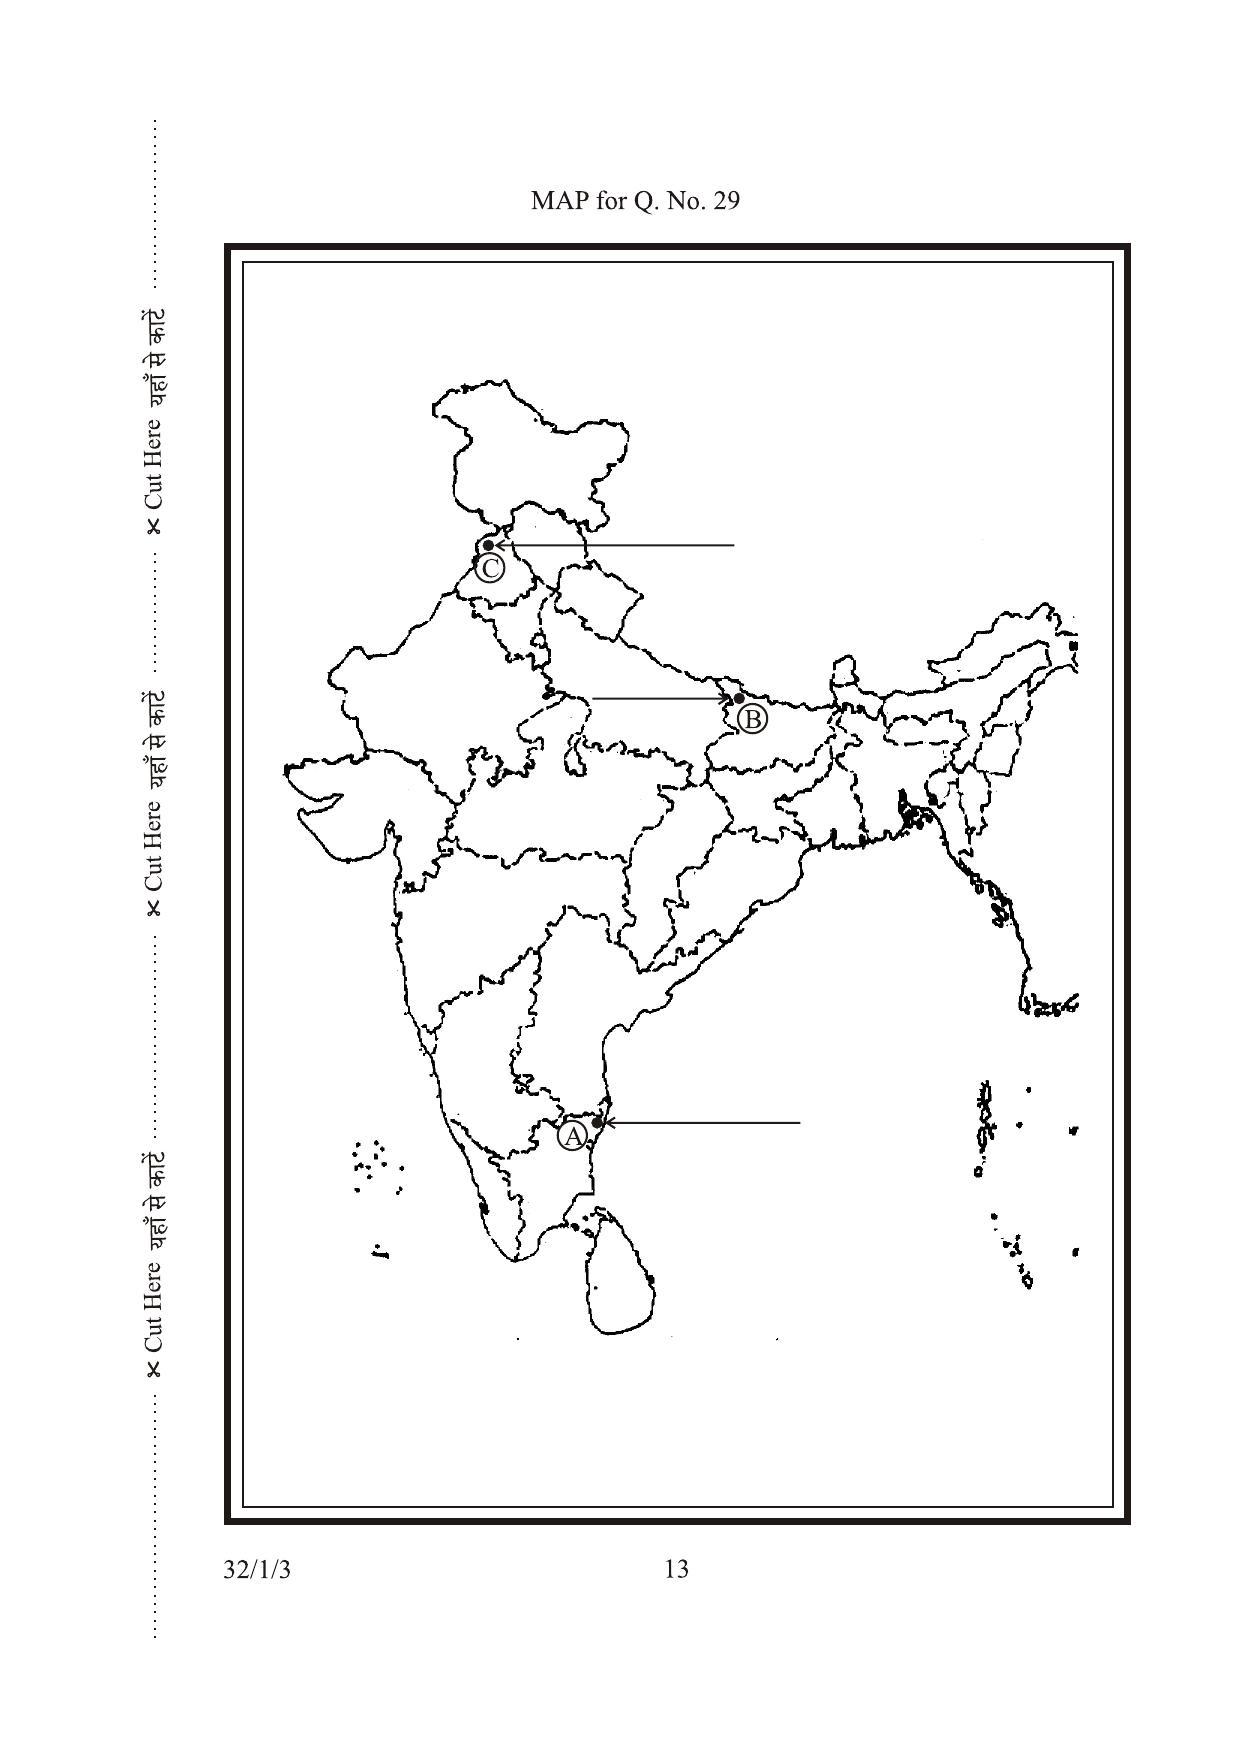 CBSE Class 10 32-1-3 Map SOCIAL SCIENCE 2016 Question Paper - Page 1